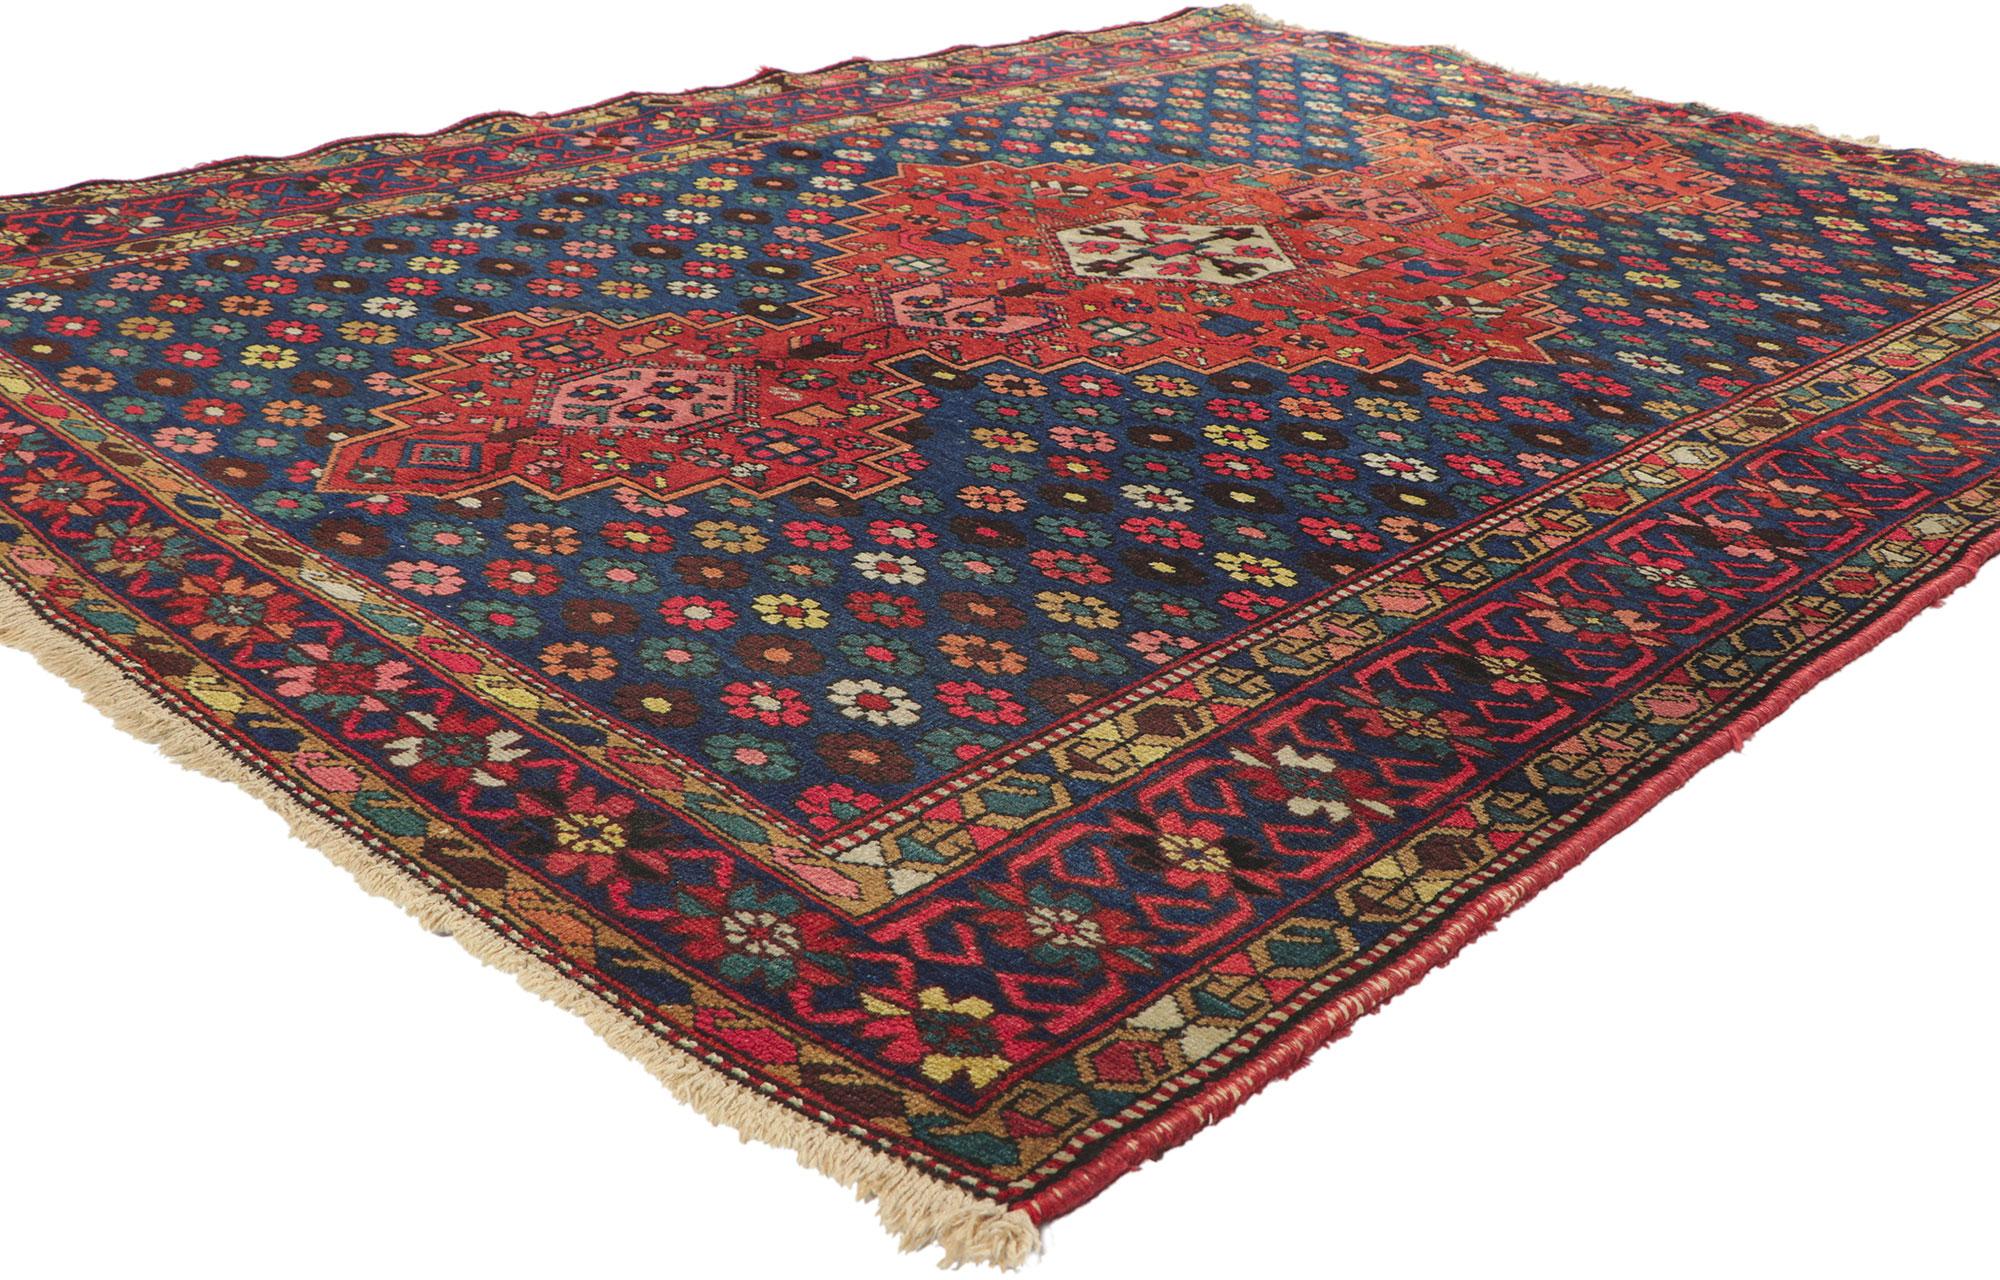 73281 Antique Persian Bakhtiari Rug, 05'05 x 07'01.
Regal and refined, this hand-knotted wool antique Persian Bakhtiari rug takes on a curated lived-in look that feels timeless while imparting a sense of warmth and welcomed informality. The